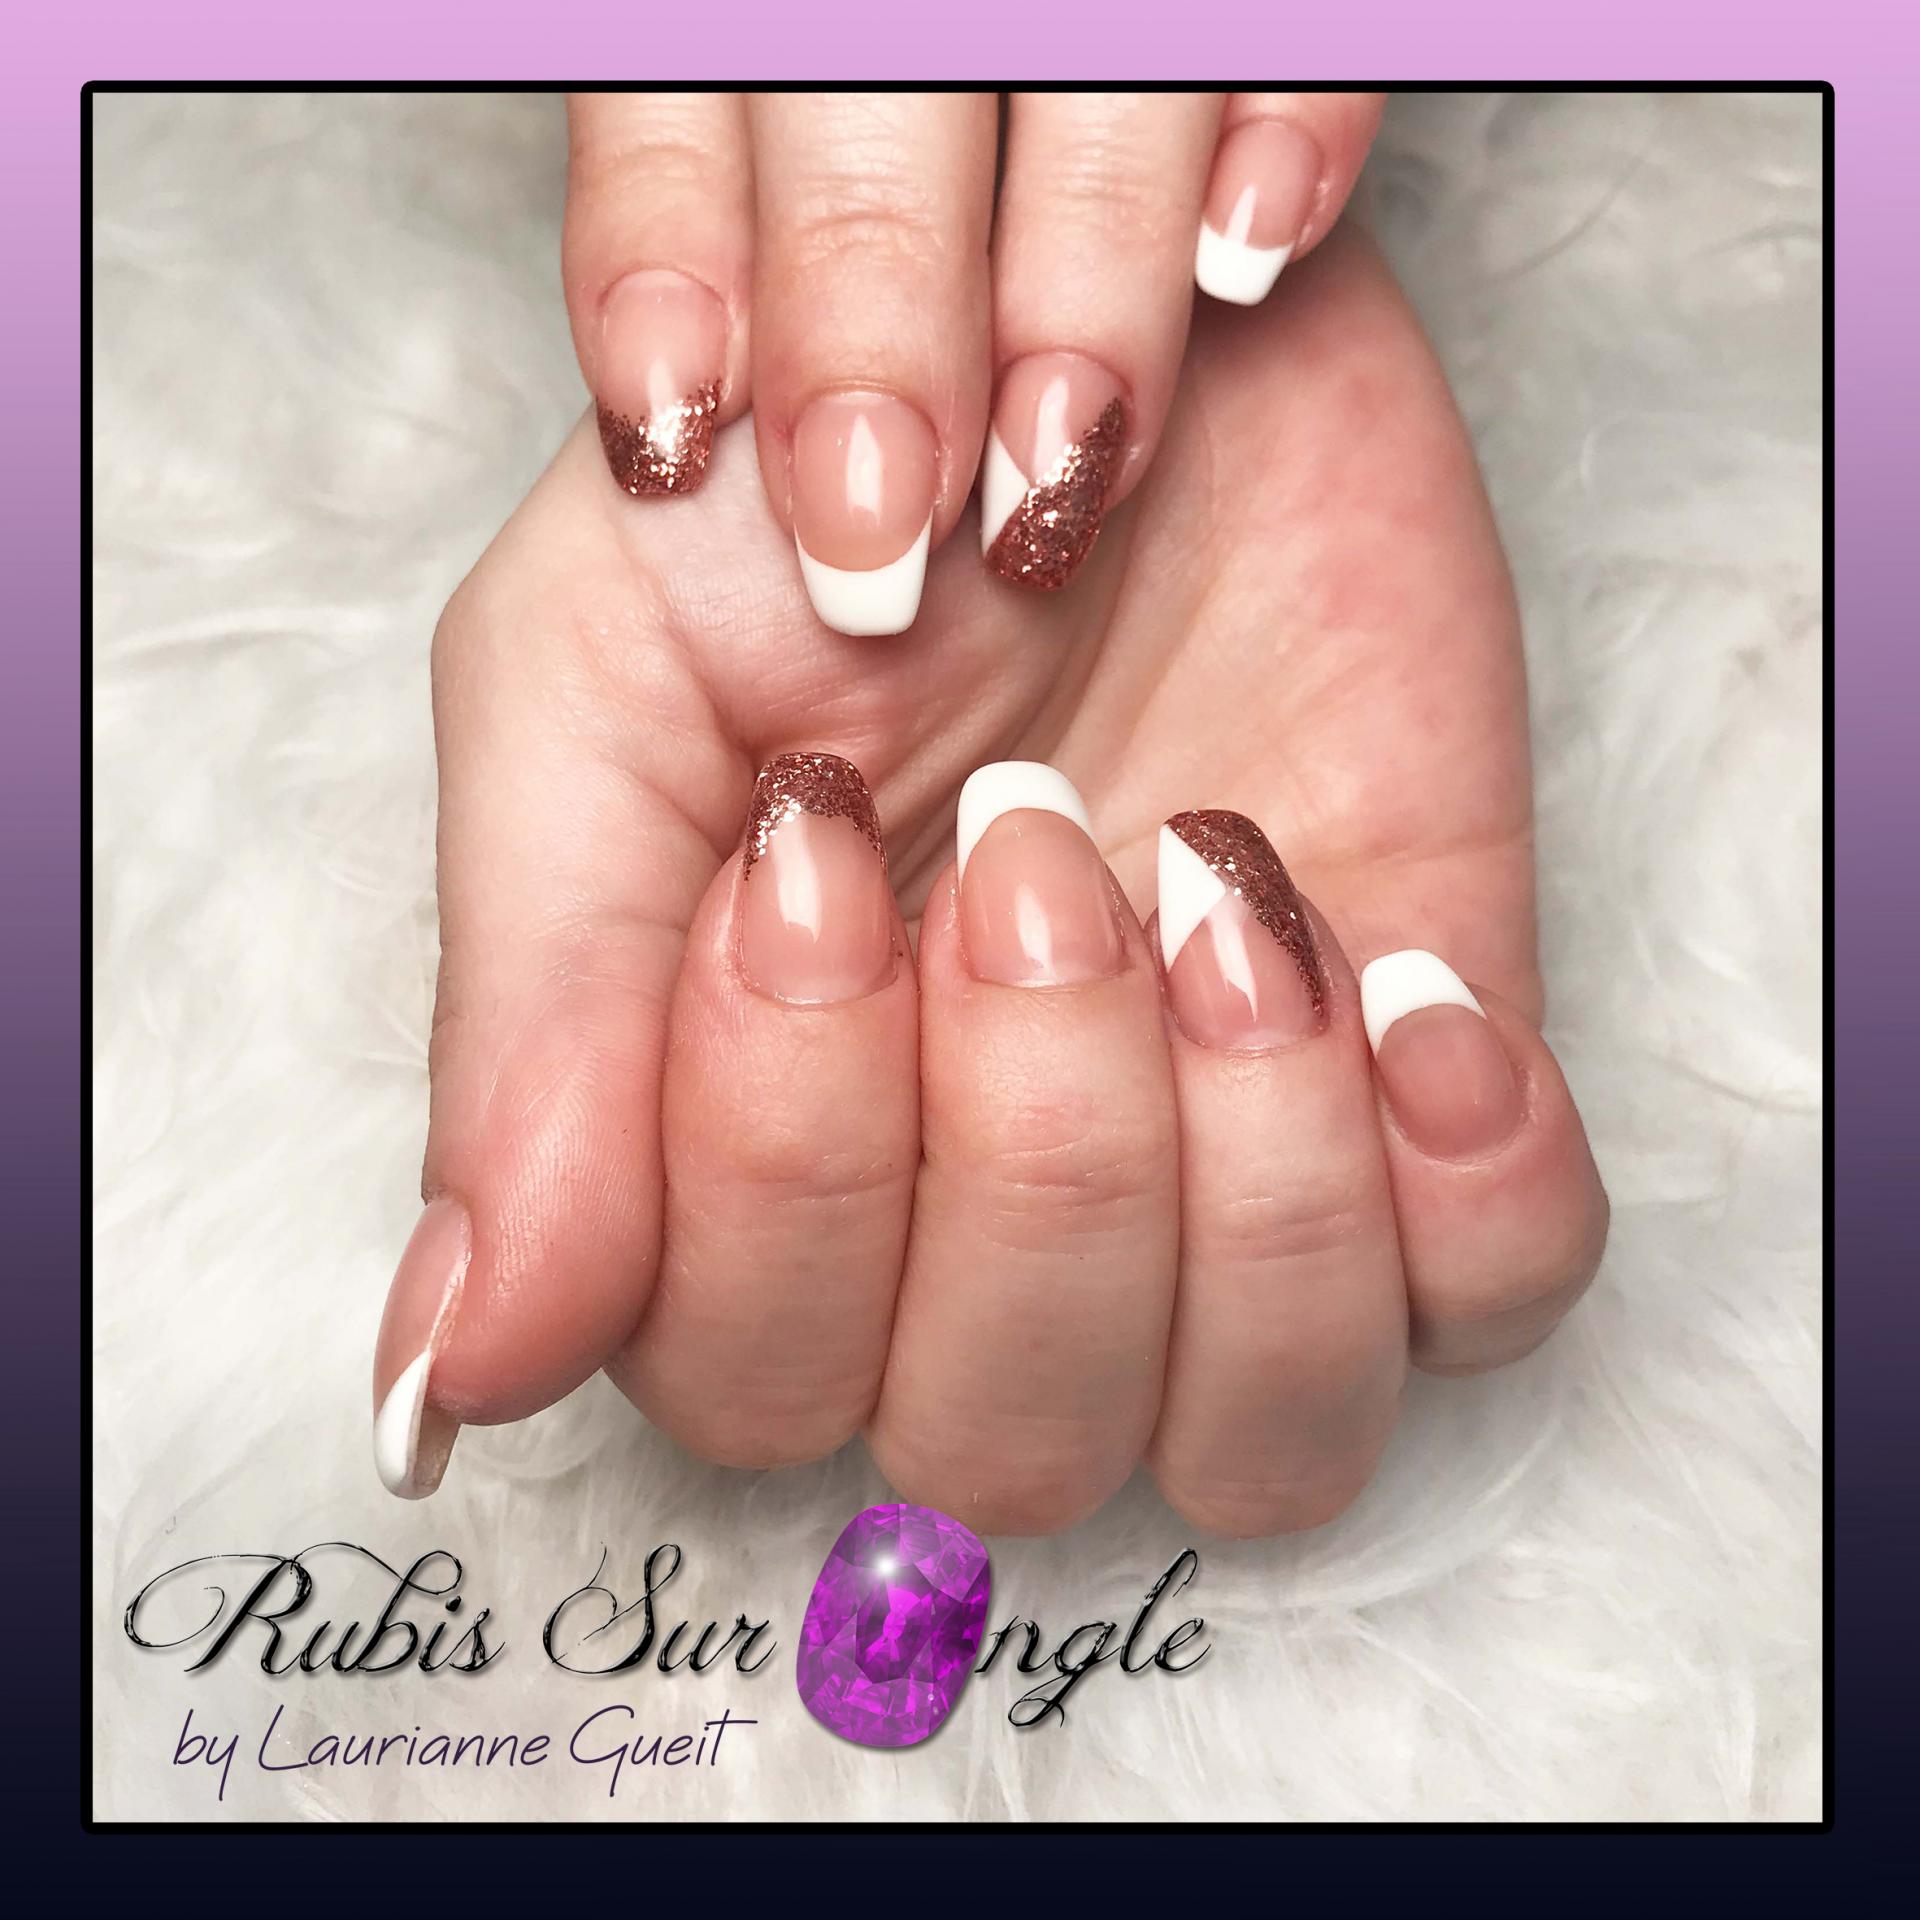 Rubis-sur-ongle-Nail-art-french-rose-gold